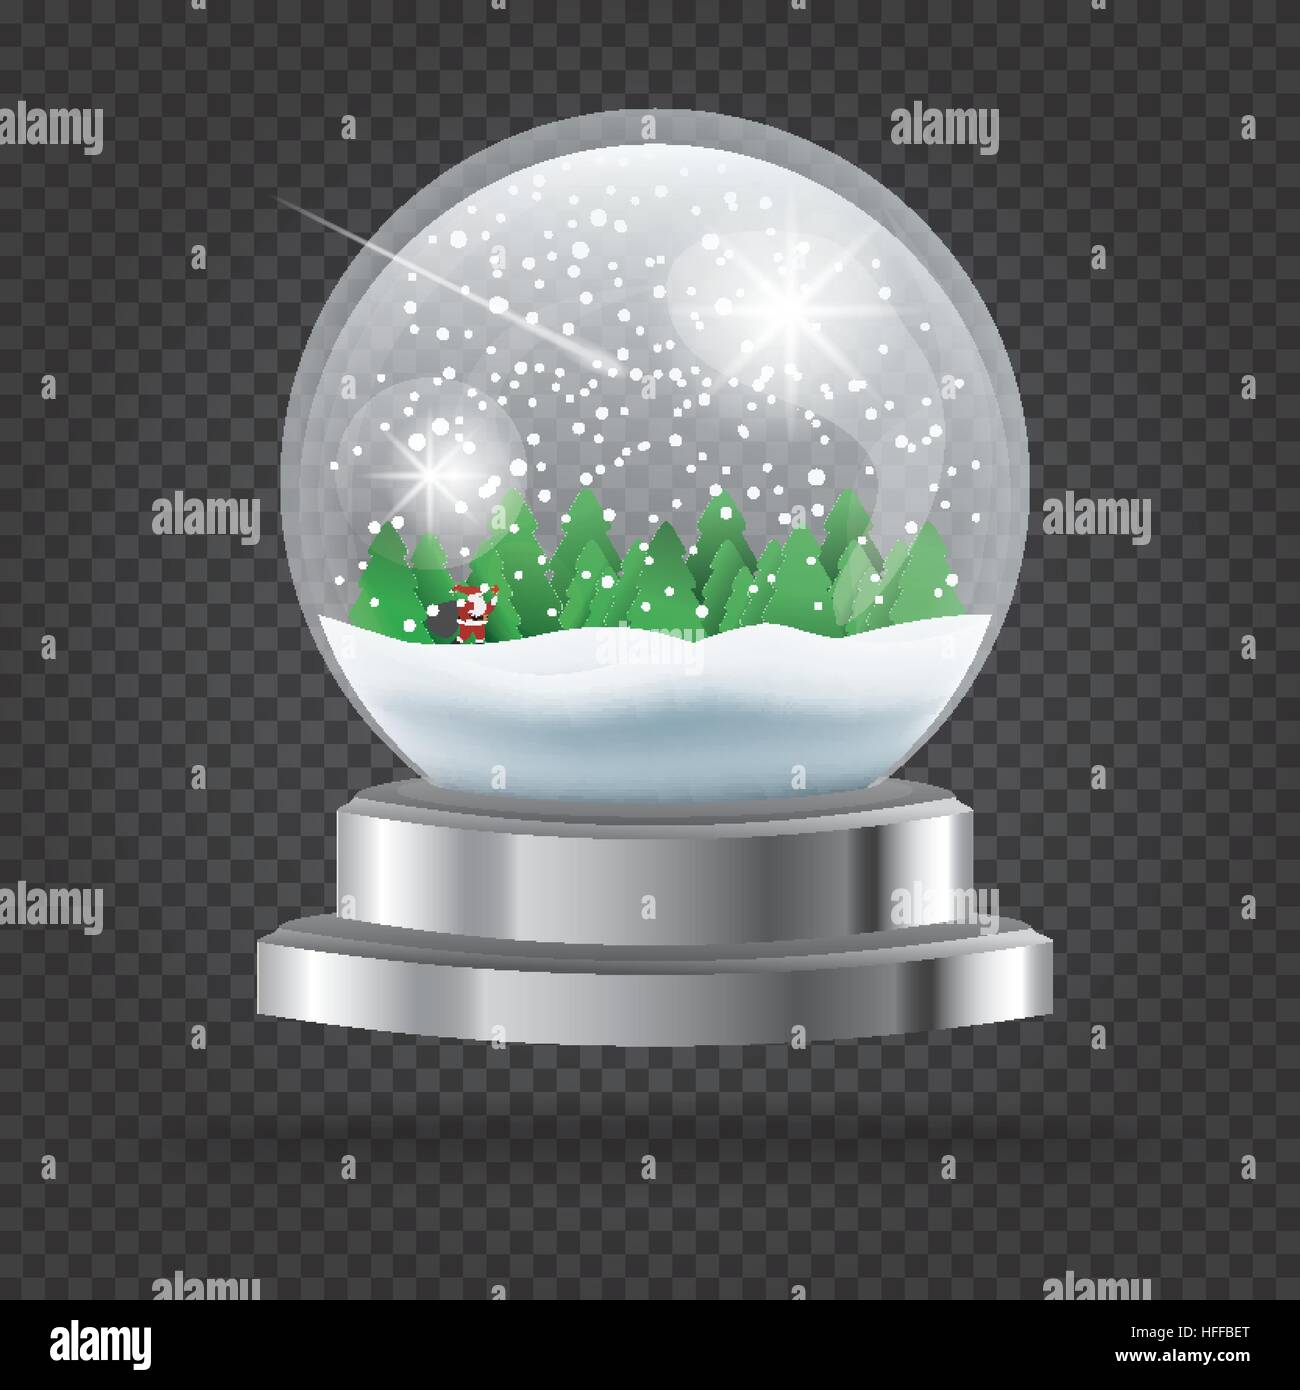 Transparent Christmas Crystal Ball with Santa Claus and Tree. Vector Illustration. Stock Vector